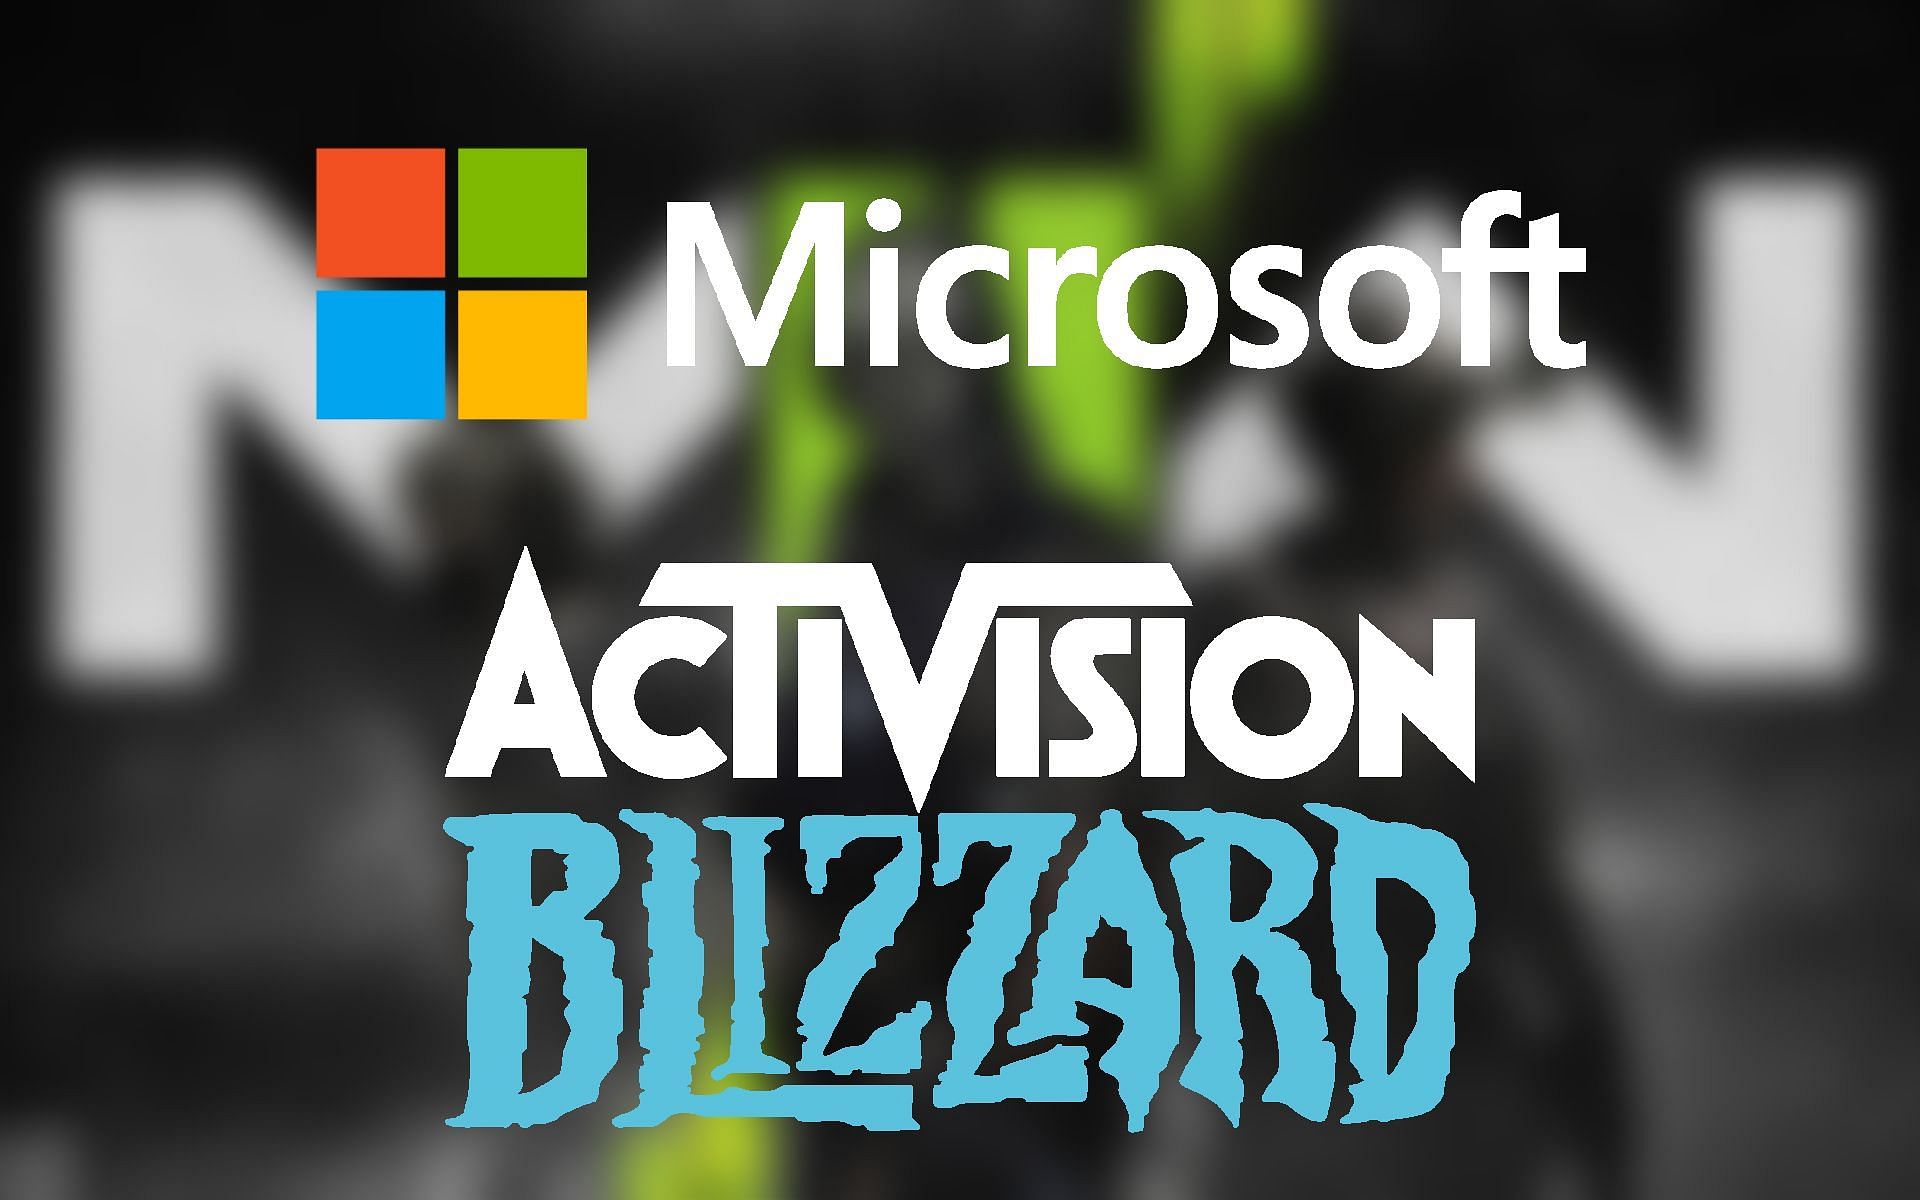 Microsoft's Activision Blizzard acquisition has officially been